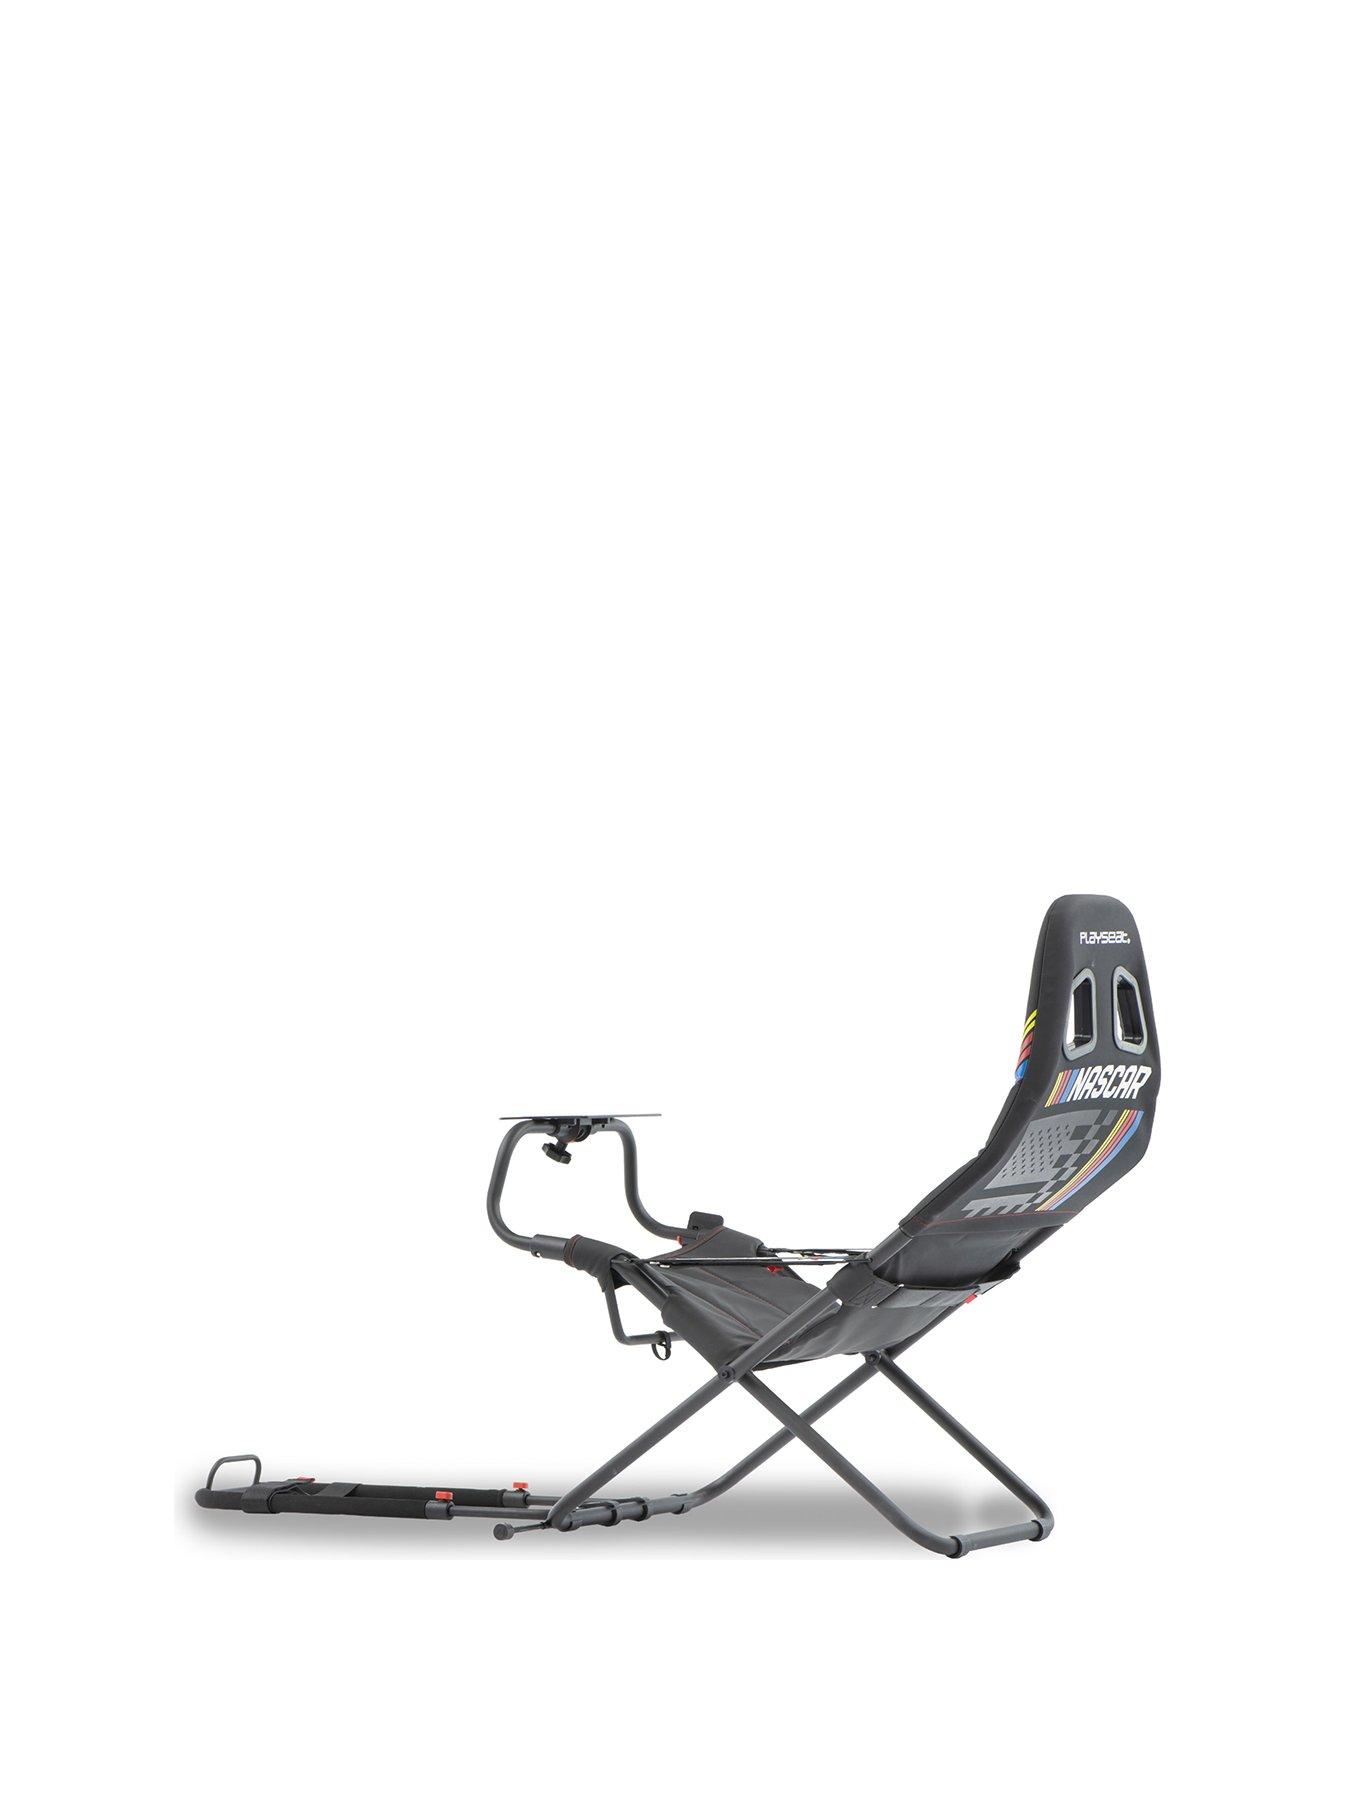 PlaySeat Playseat Challenge - NASCAR Edition *LIMITED EDITION*